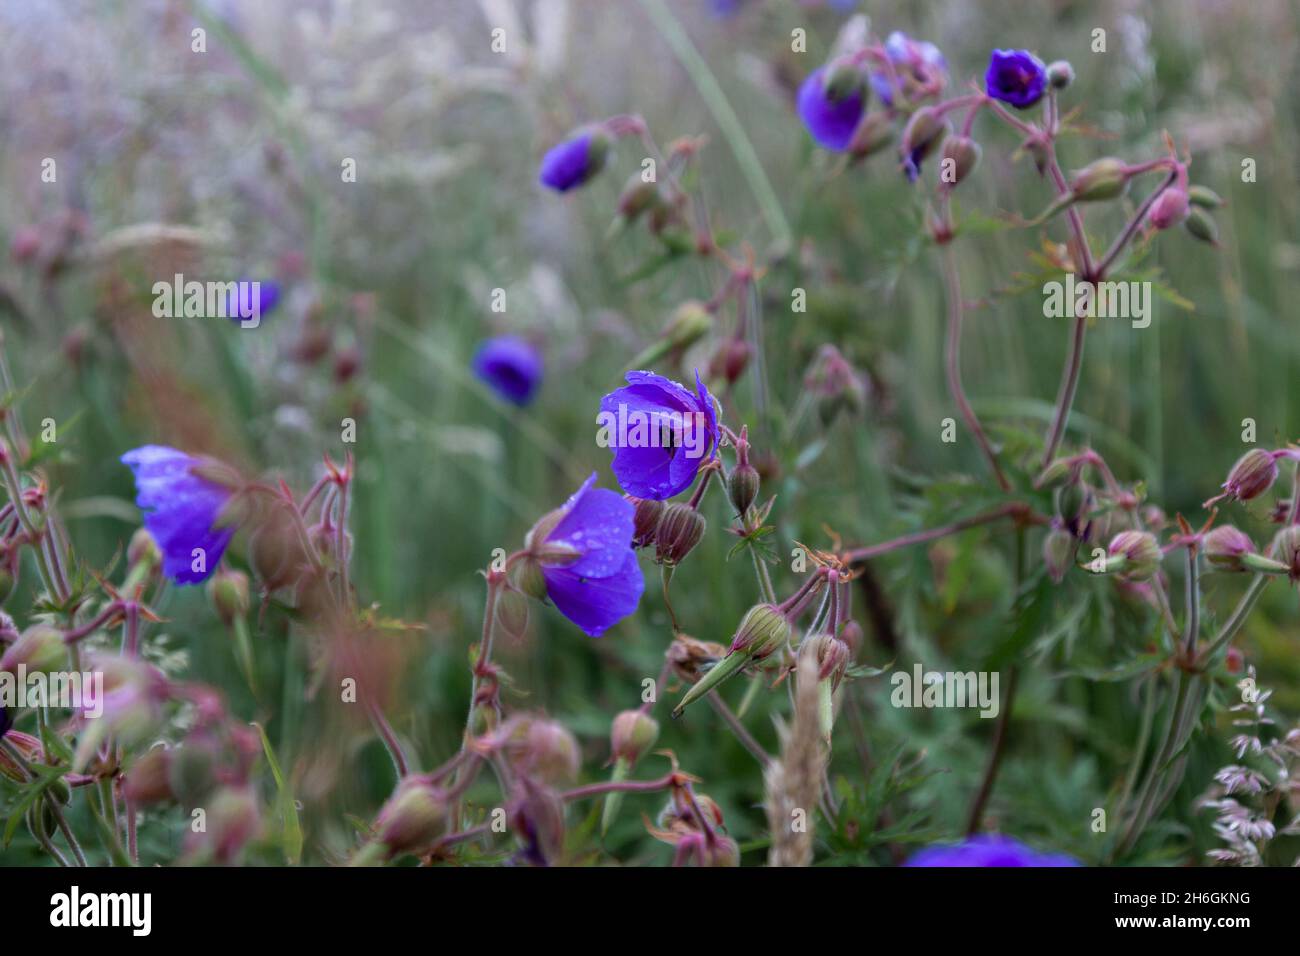 Purple Wildflowers / flowers in bloom during the Scottish summer with a natural green background. Nature is beautiful Stock Photo